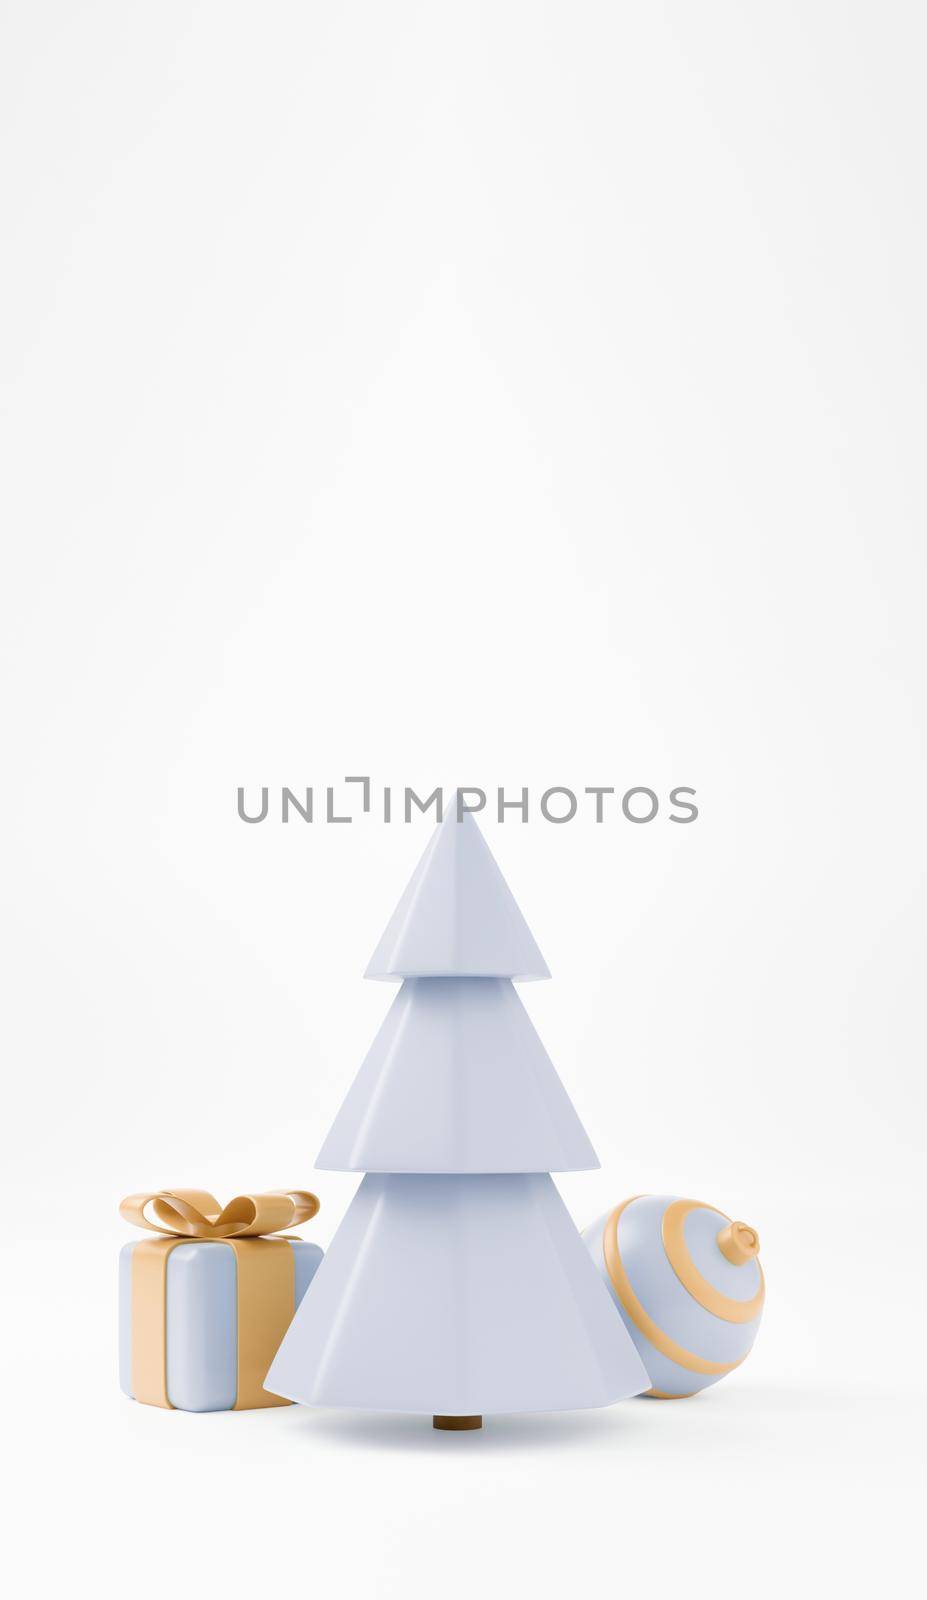 3d Christmas tree with gift box and ball vertical background, xmas poster, web banner. 3d illustration minimal style christmas and new year concept.